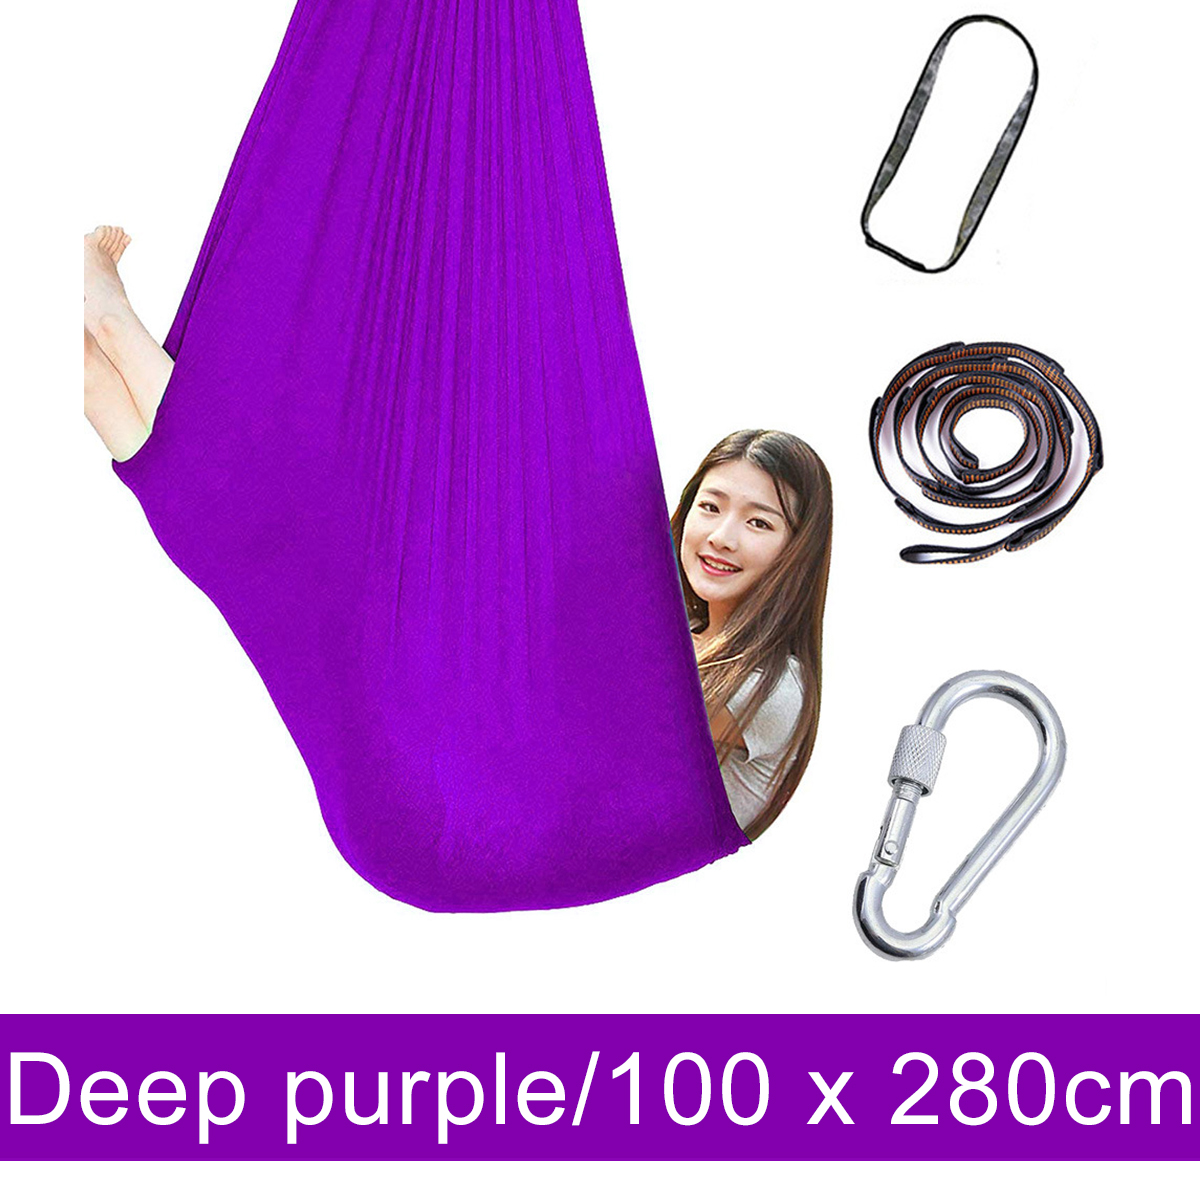 100cm x 280cm Kids Therapy Swing Cuddle Hanging Hammock with Autism ADHD Aspergers Sensory 36